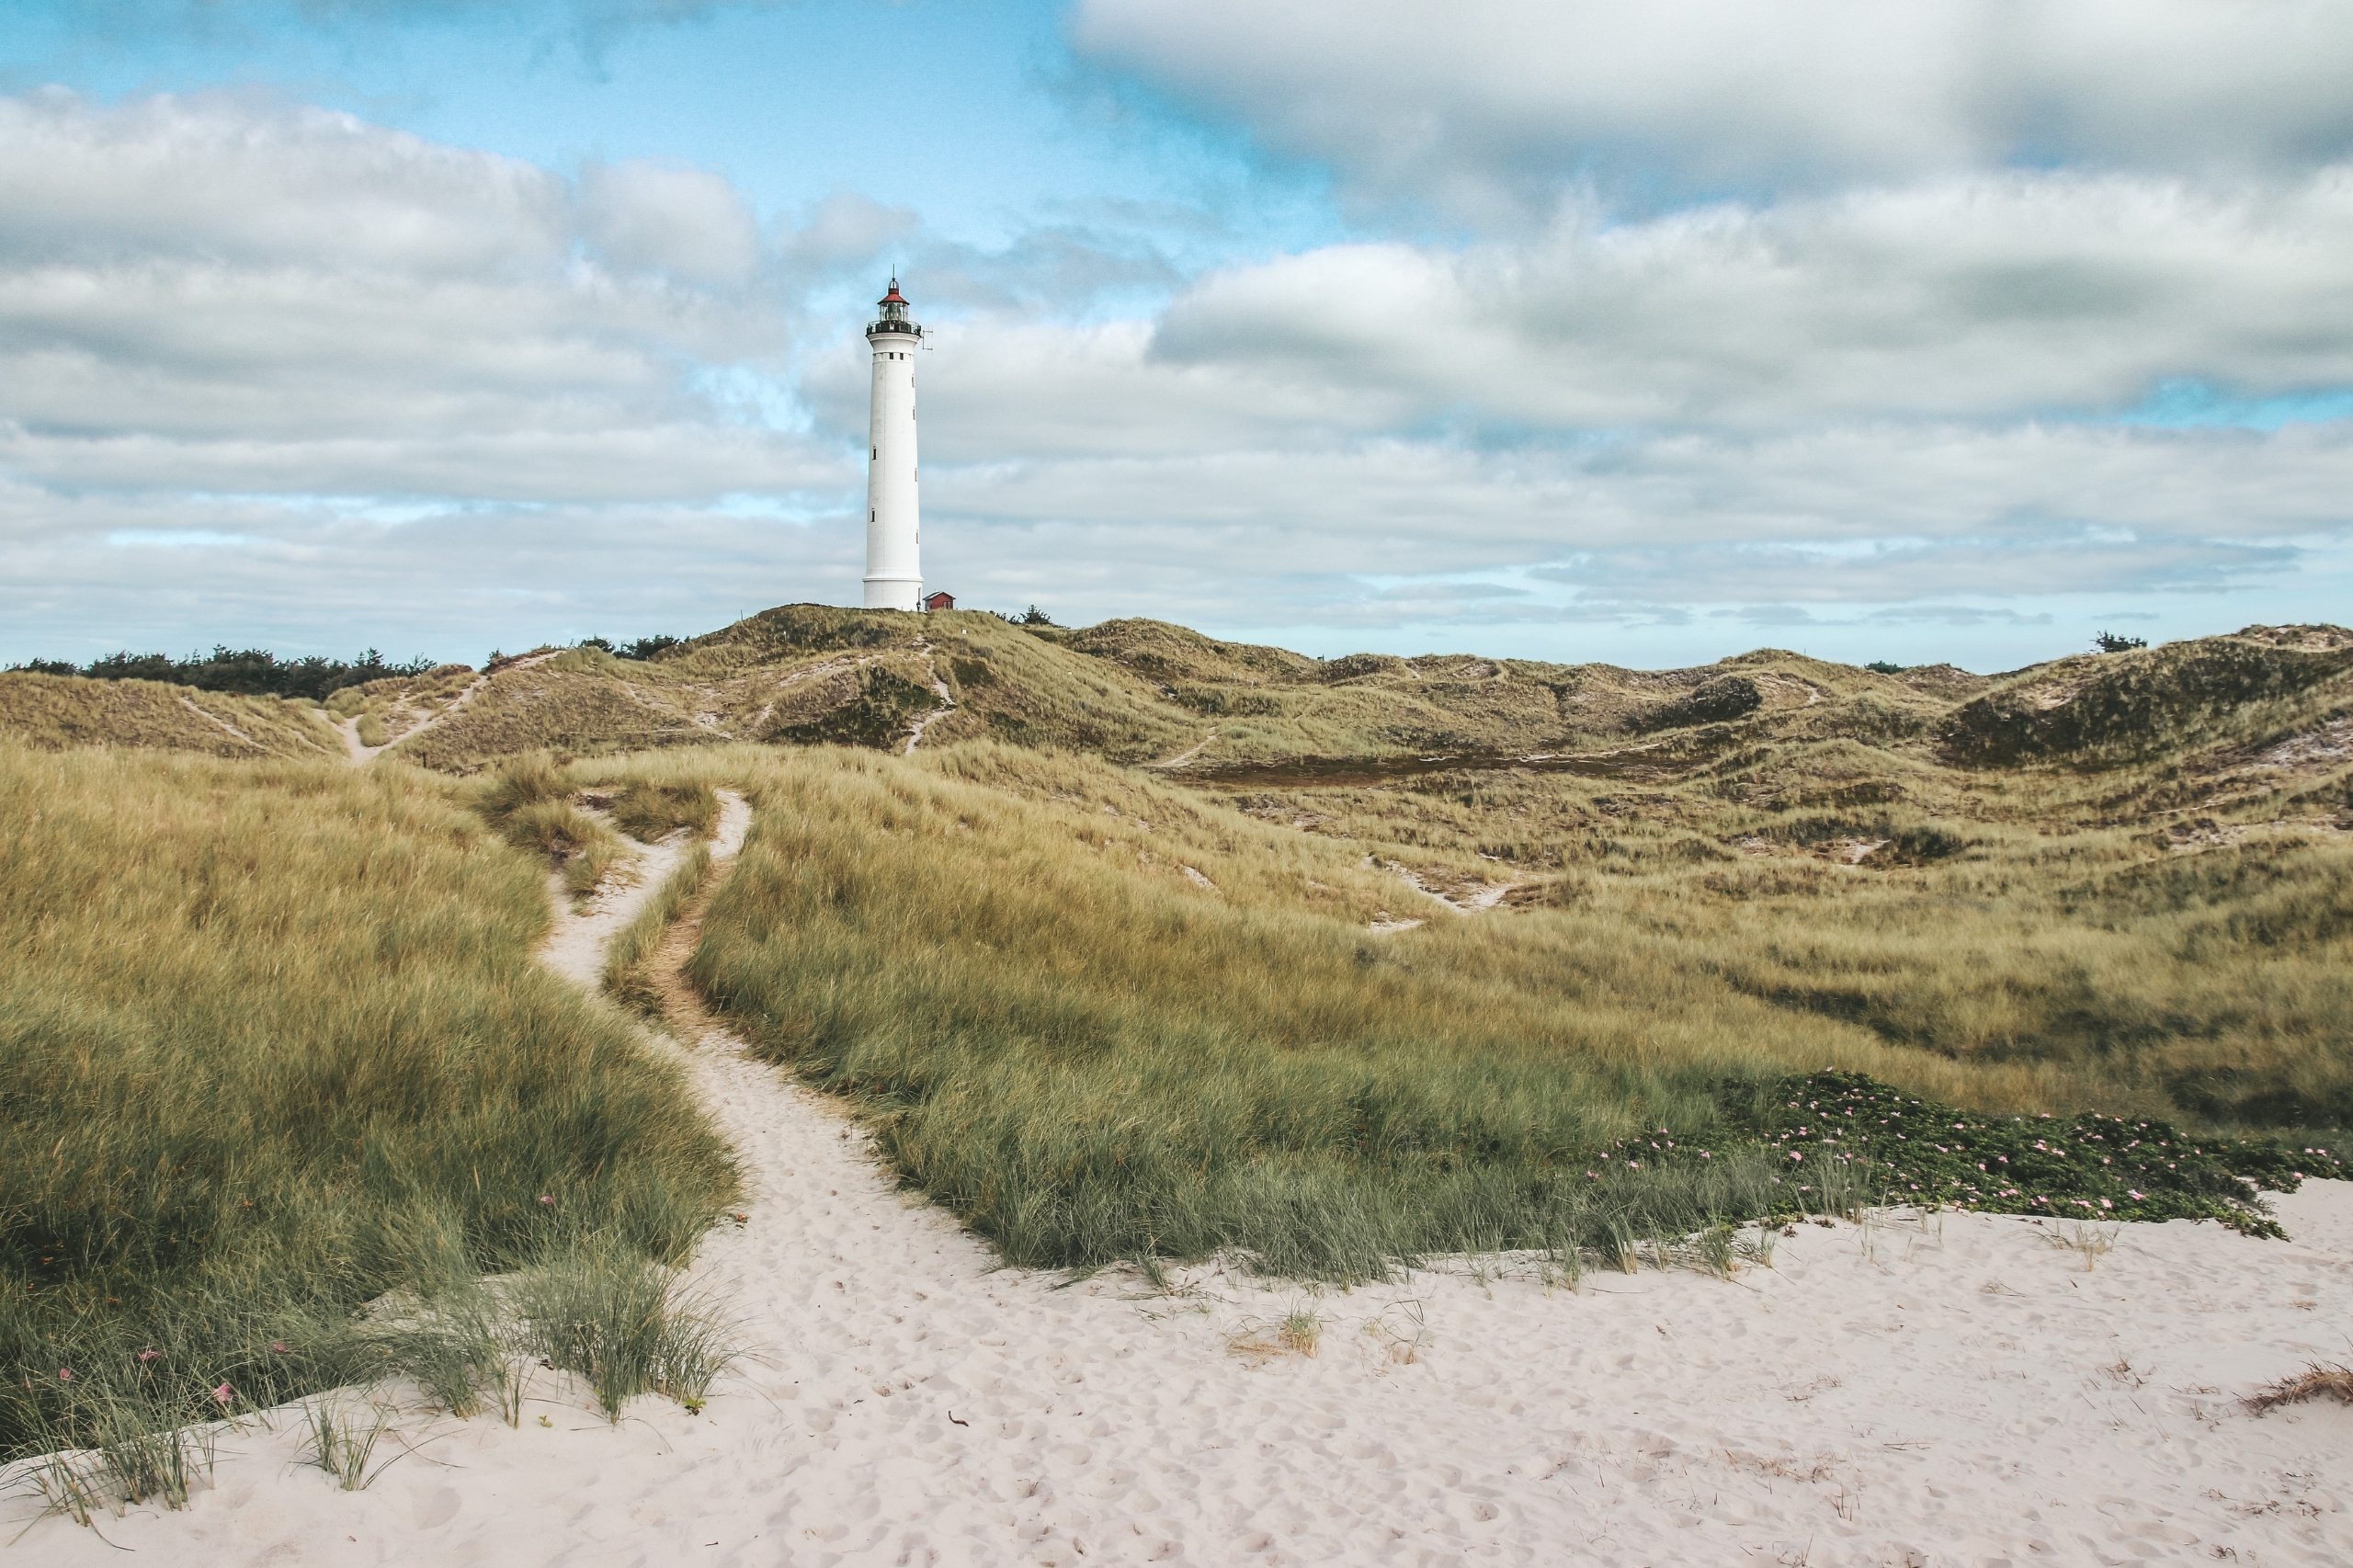 About 15 minutes drive from the campsite, you’ll find the lighthouse Lyngvig Fyr, which sits on a dune. 